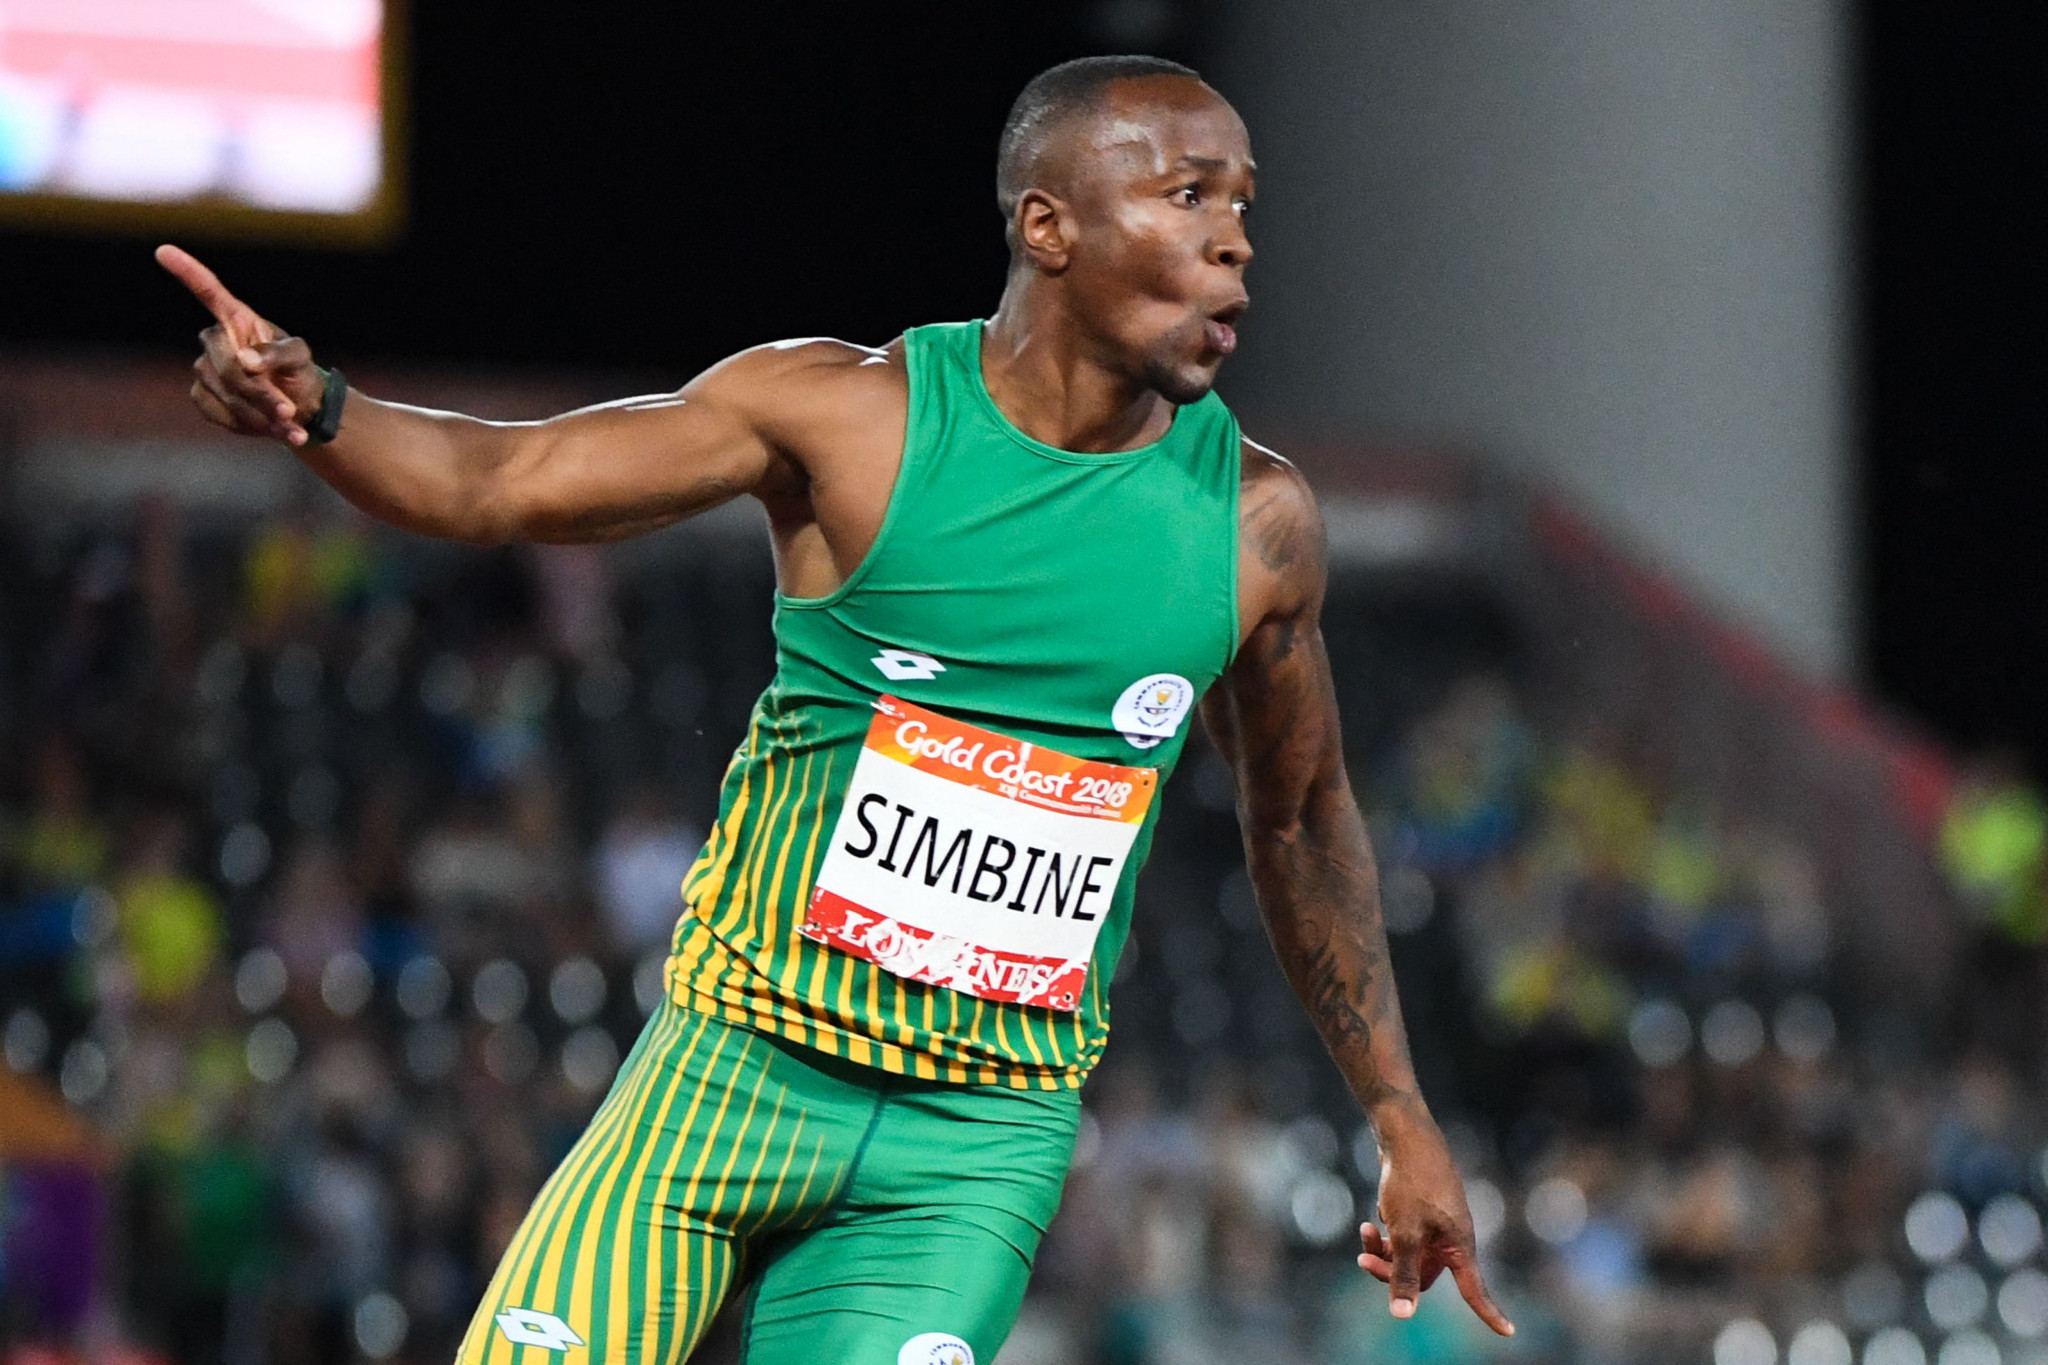 Akani Simbine will defend his Commonwealth 100 metres title ©Getty Images